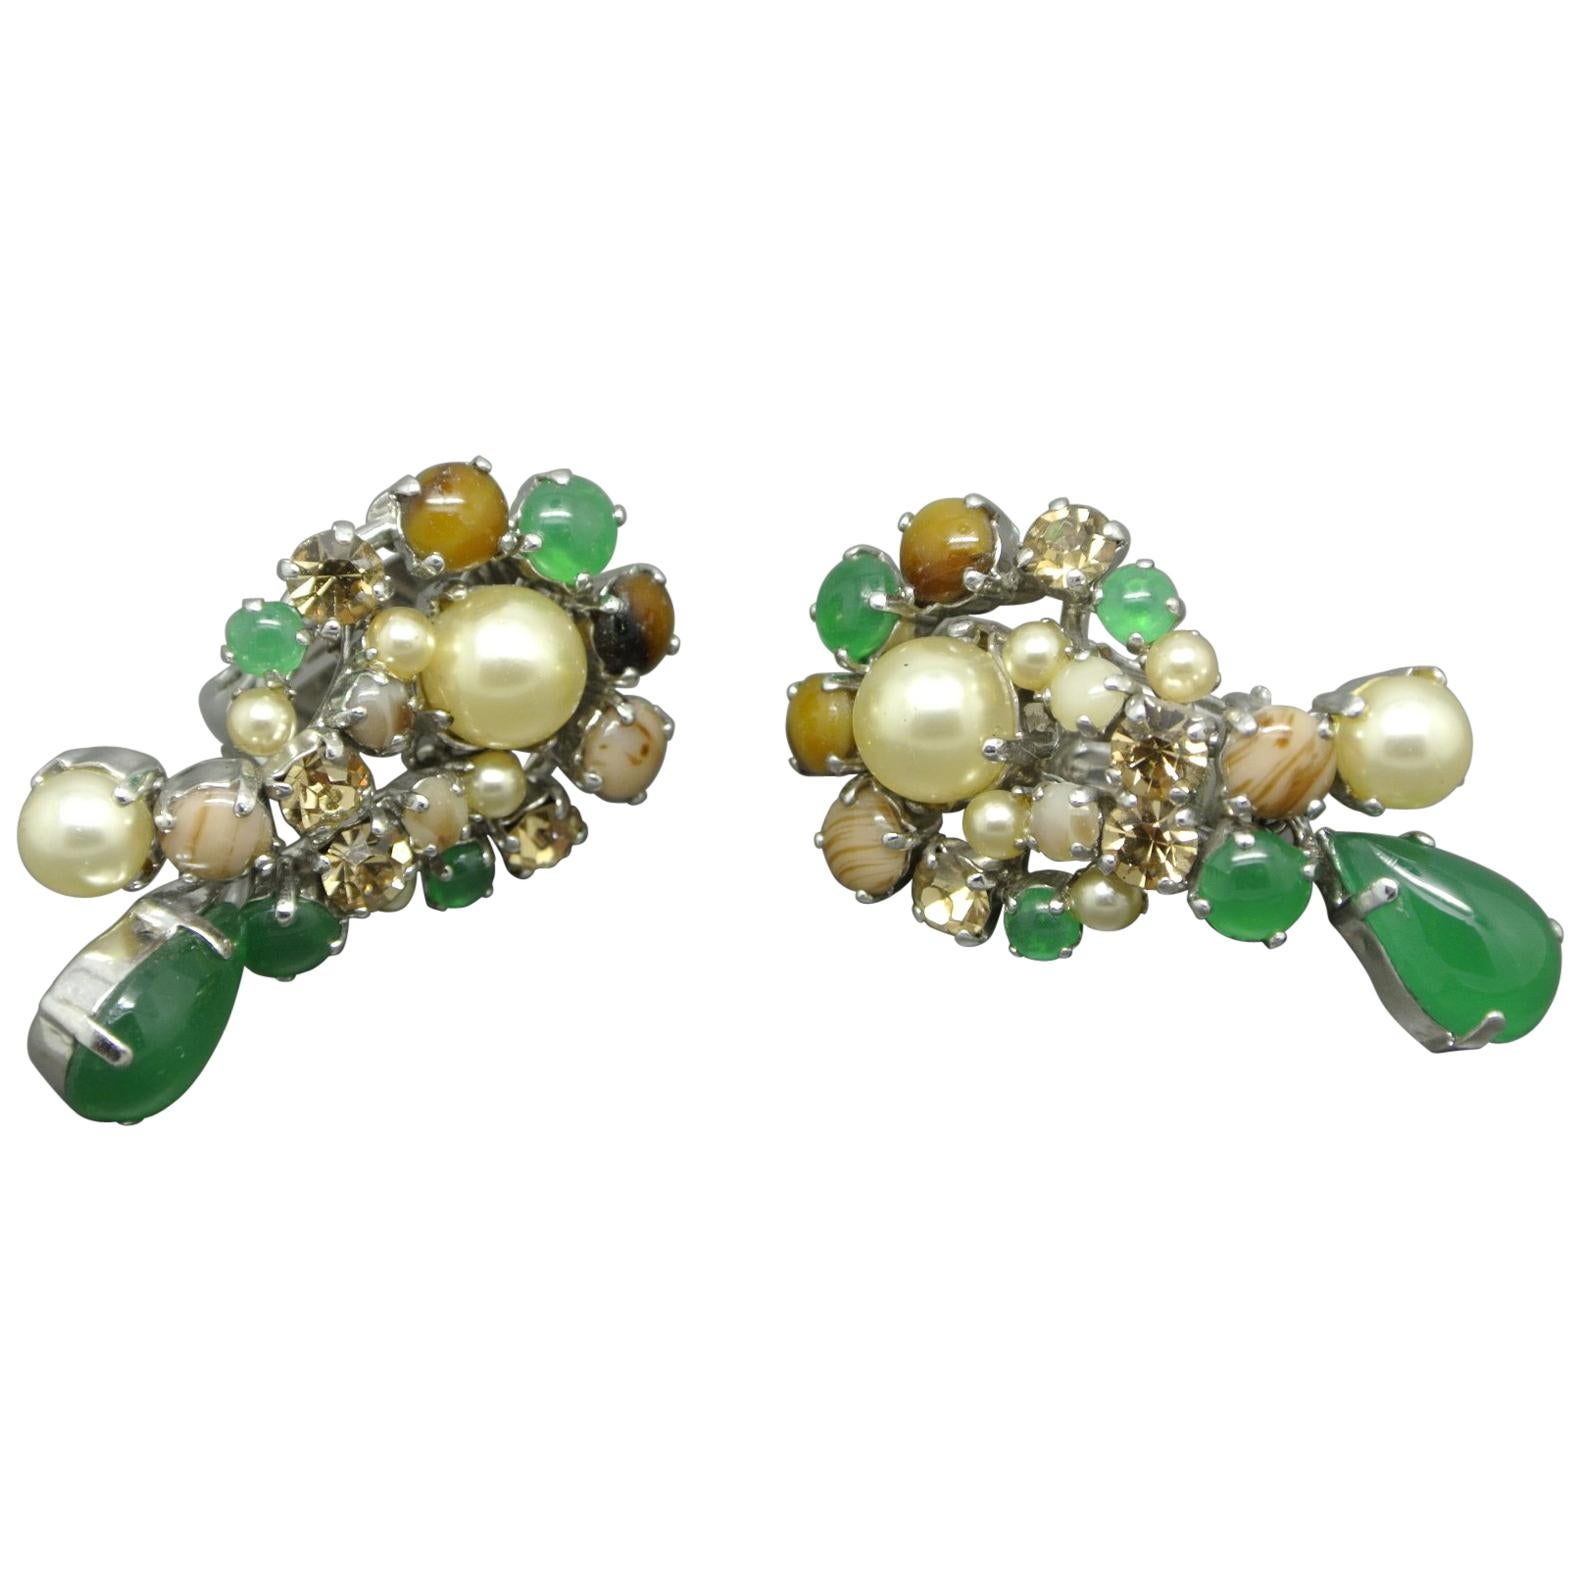 Christian Dior 1962 Green Brown Glass Earrings For Sale